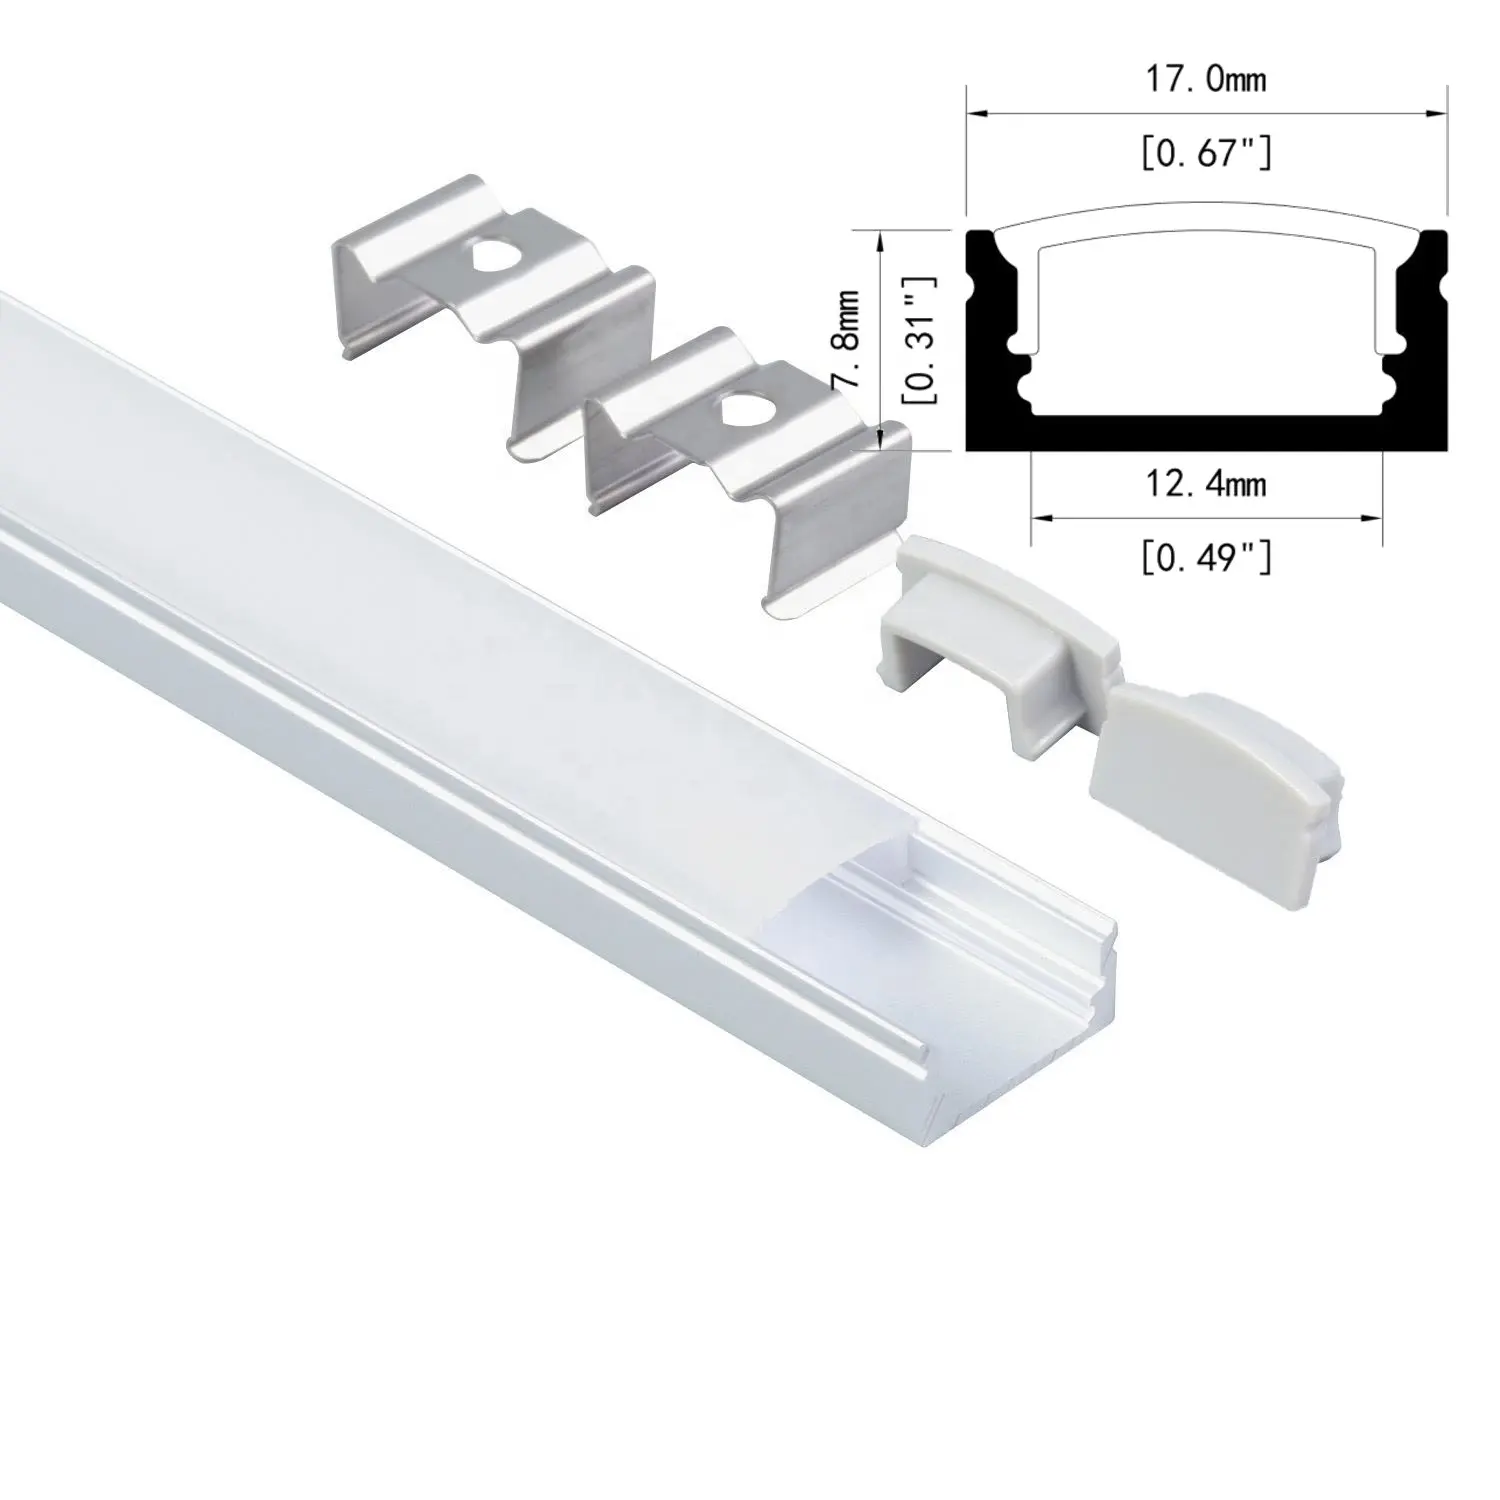 Cable-free linear light 24V safe low voltage convenient and practical adjustable linear showcase light LED profile light